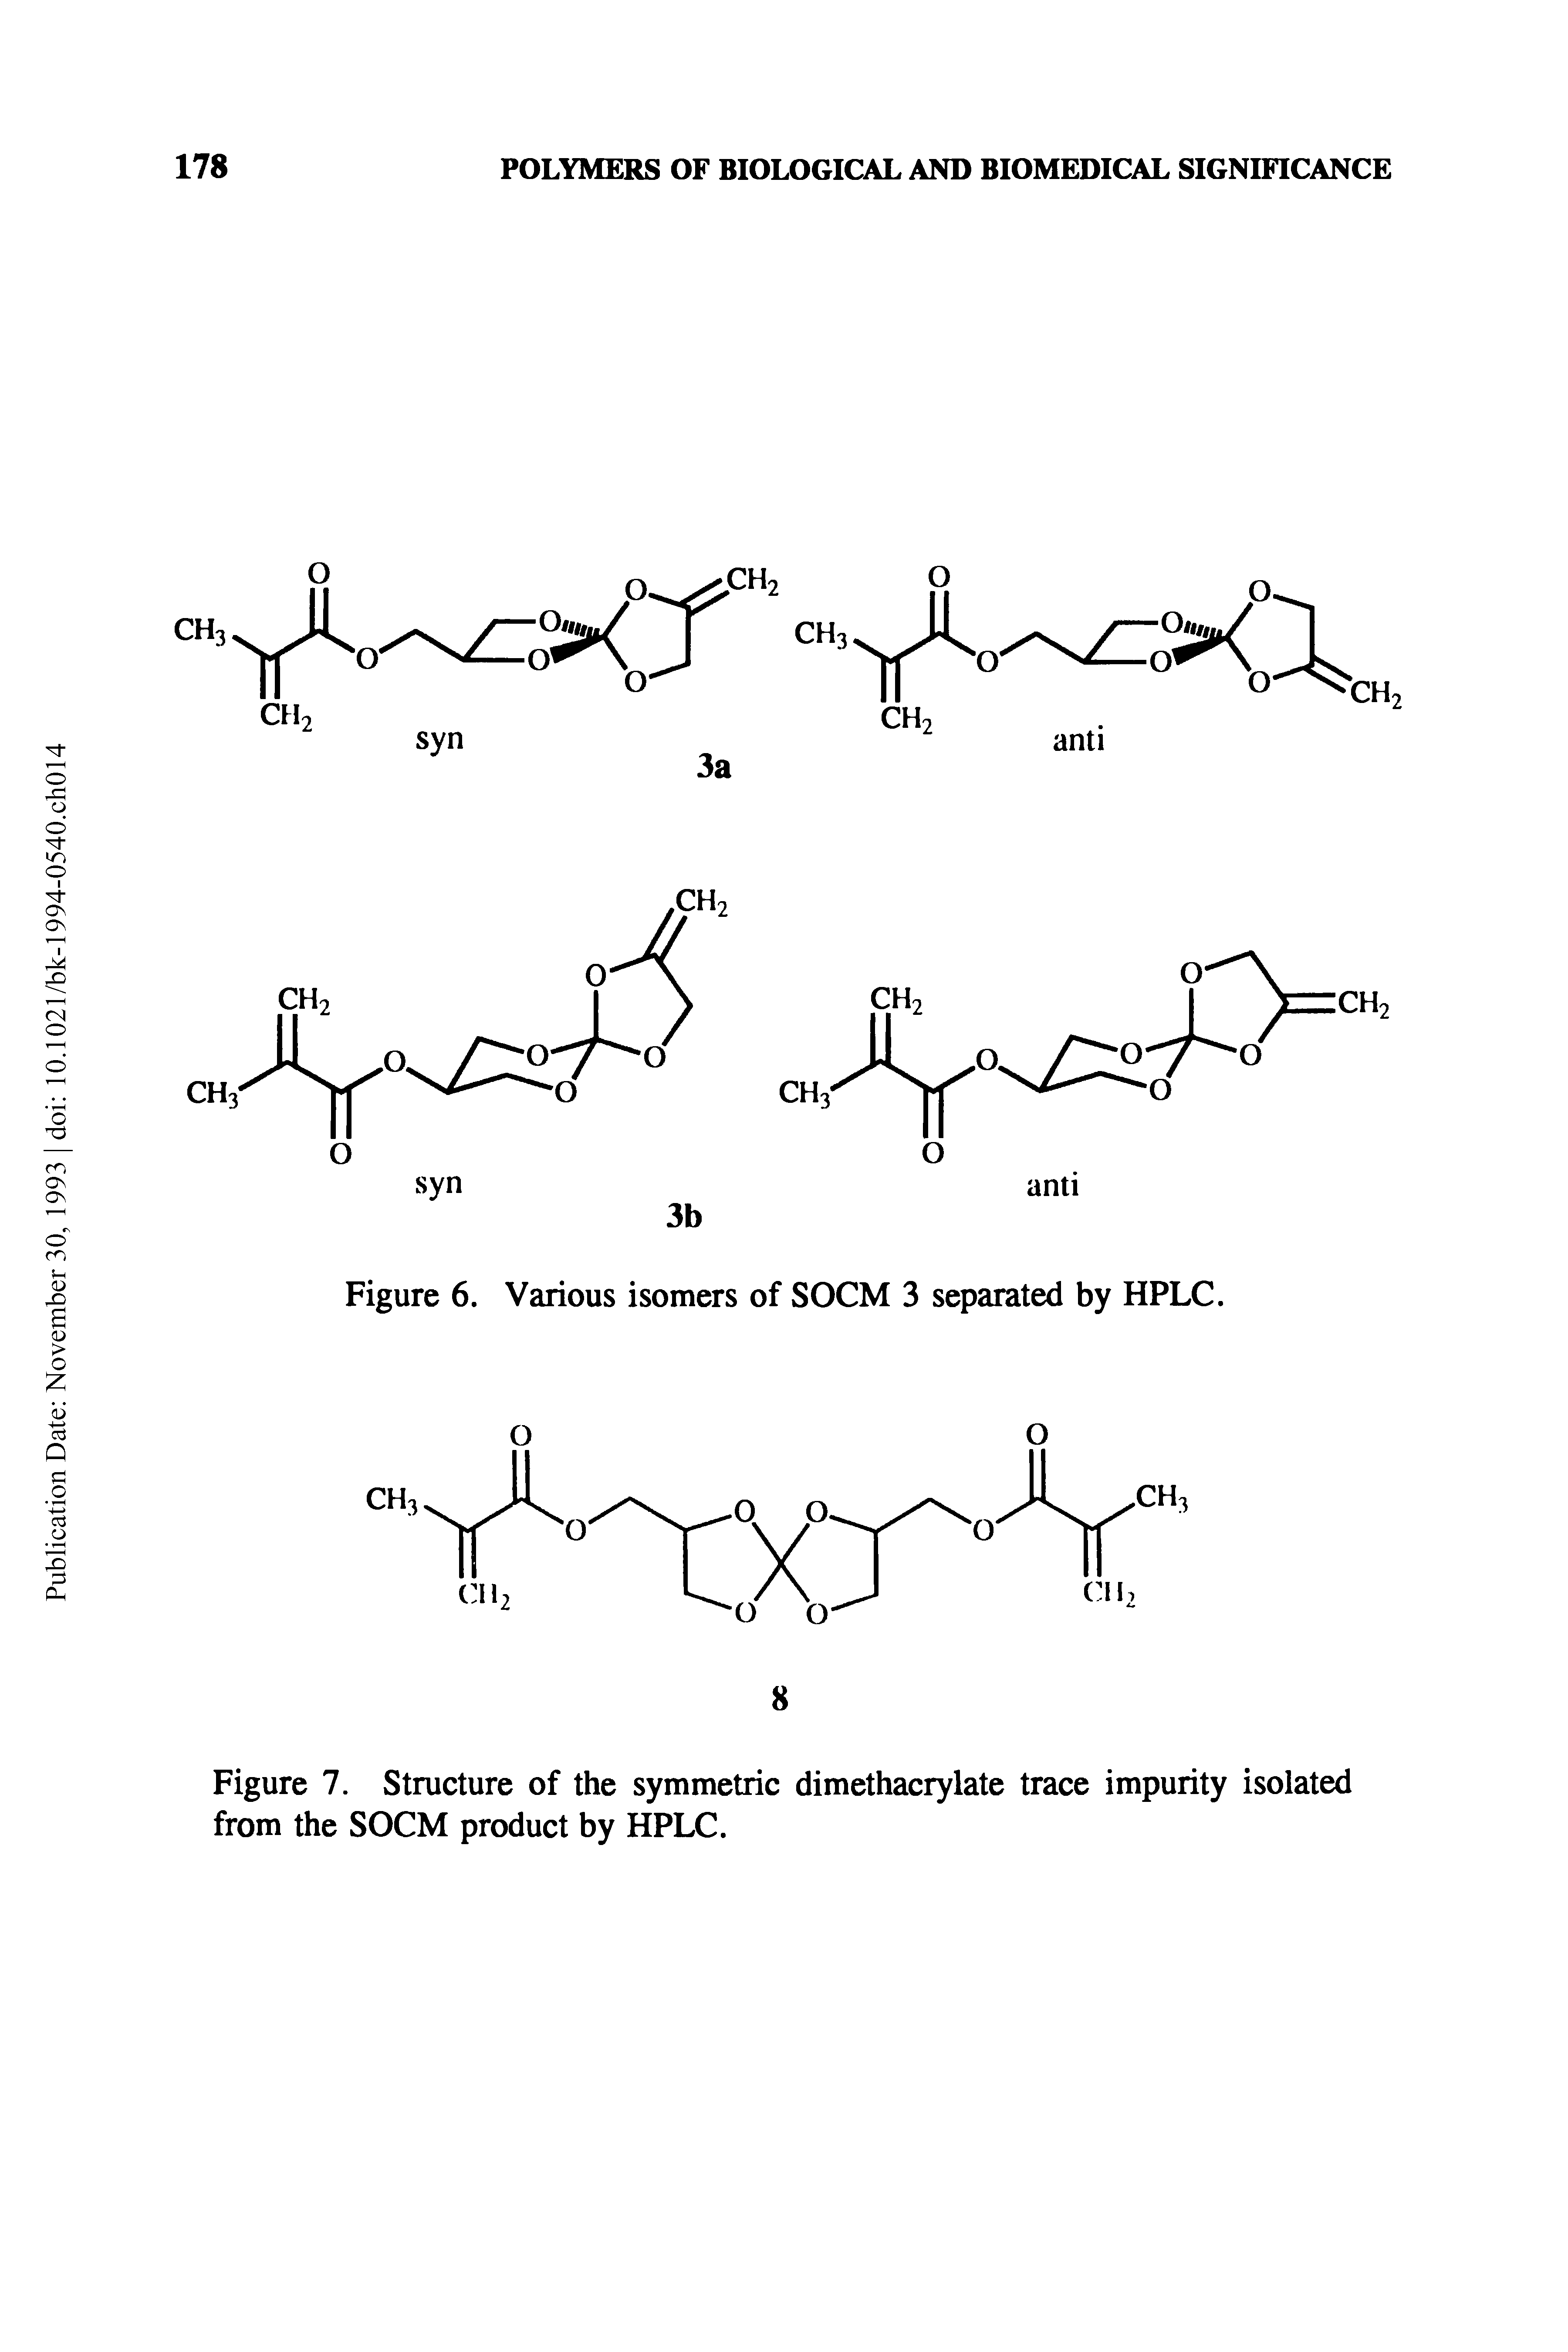 Figure 7. Structure of the symmetric dimethacrylate trace impurity isolated from the SOCM product by HPLC.